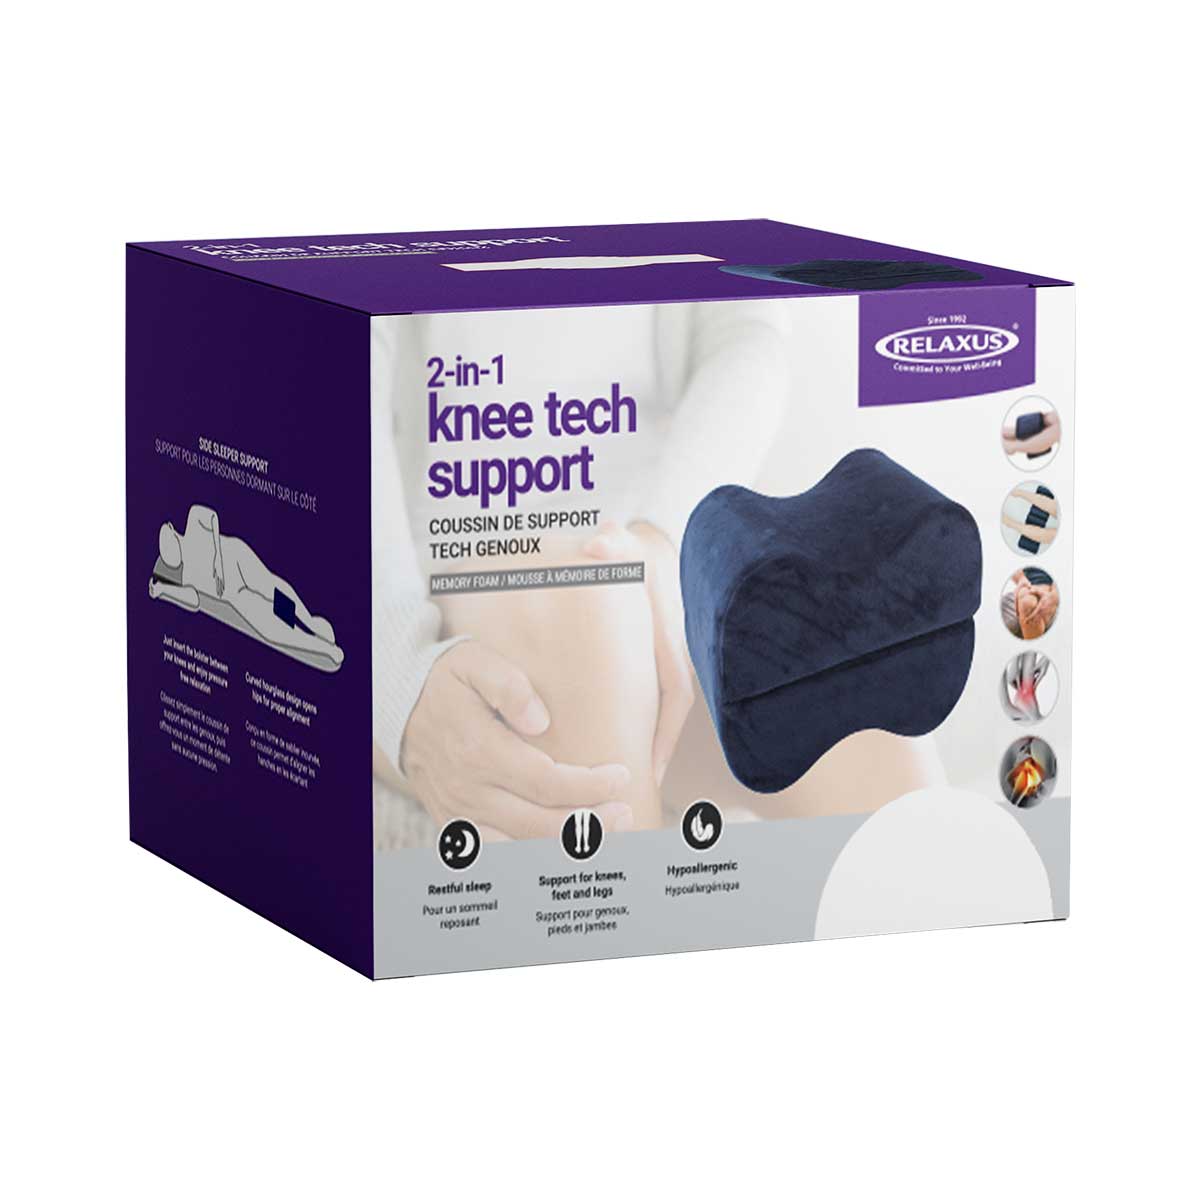 2-in-1 Knee Tech Support